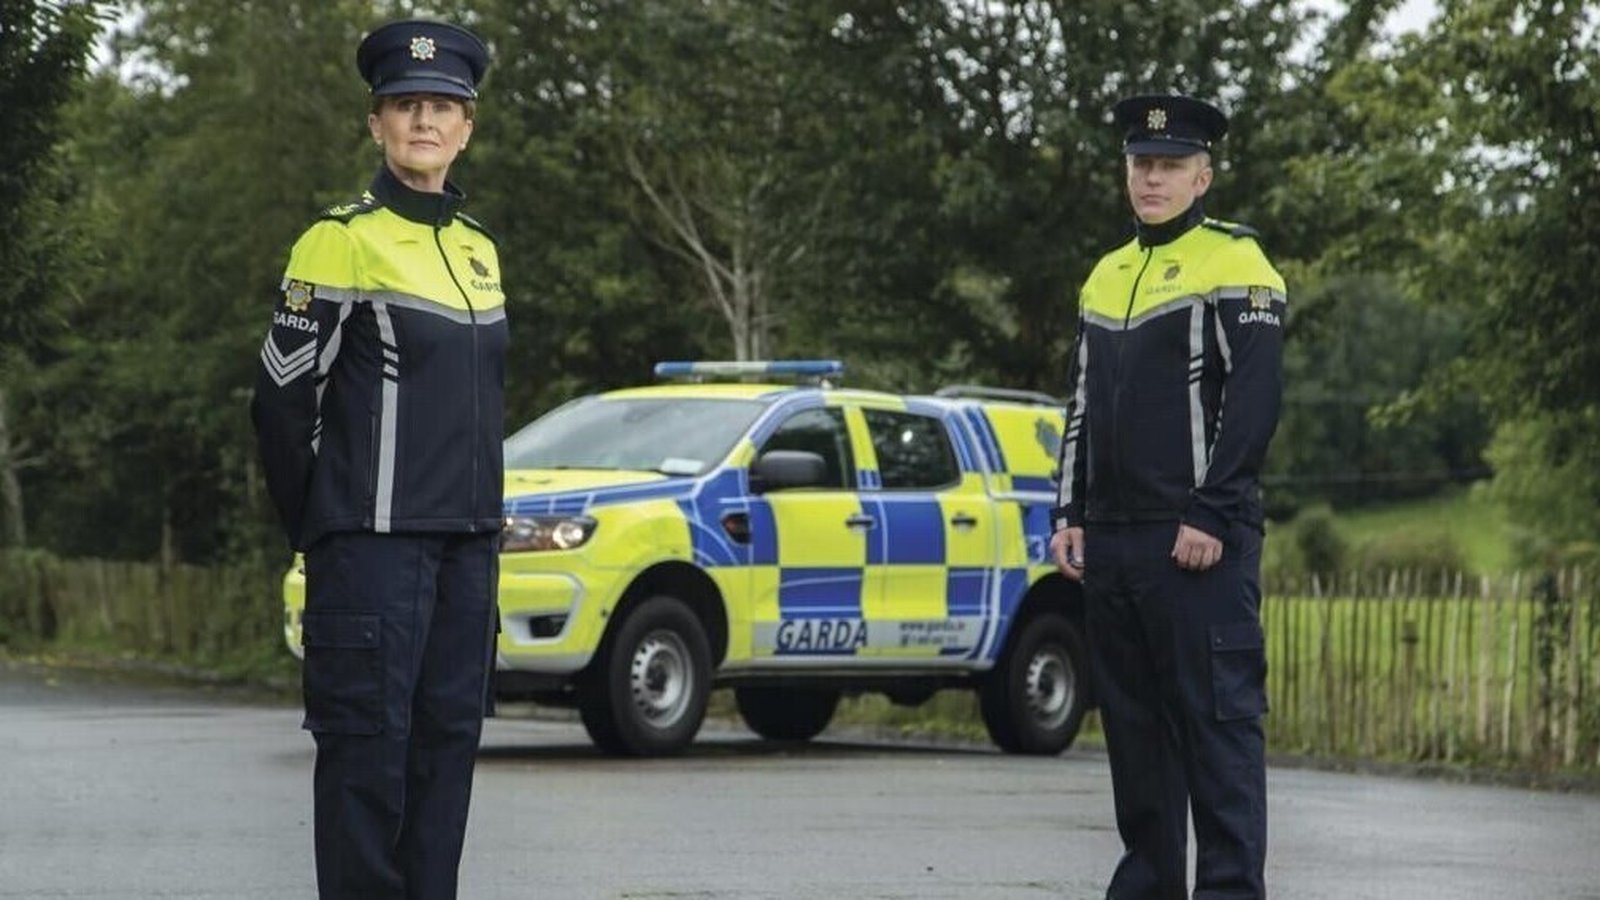 Campaign to recruit 1,000 gardaí to open this week